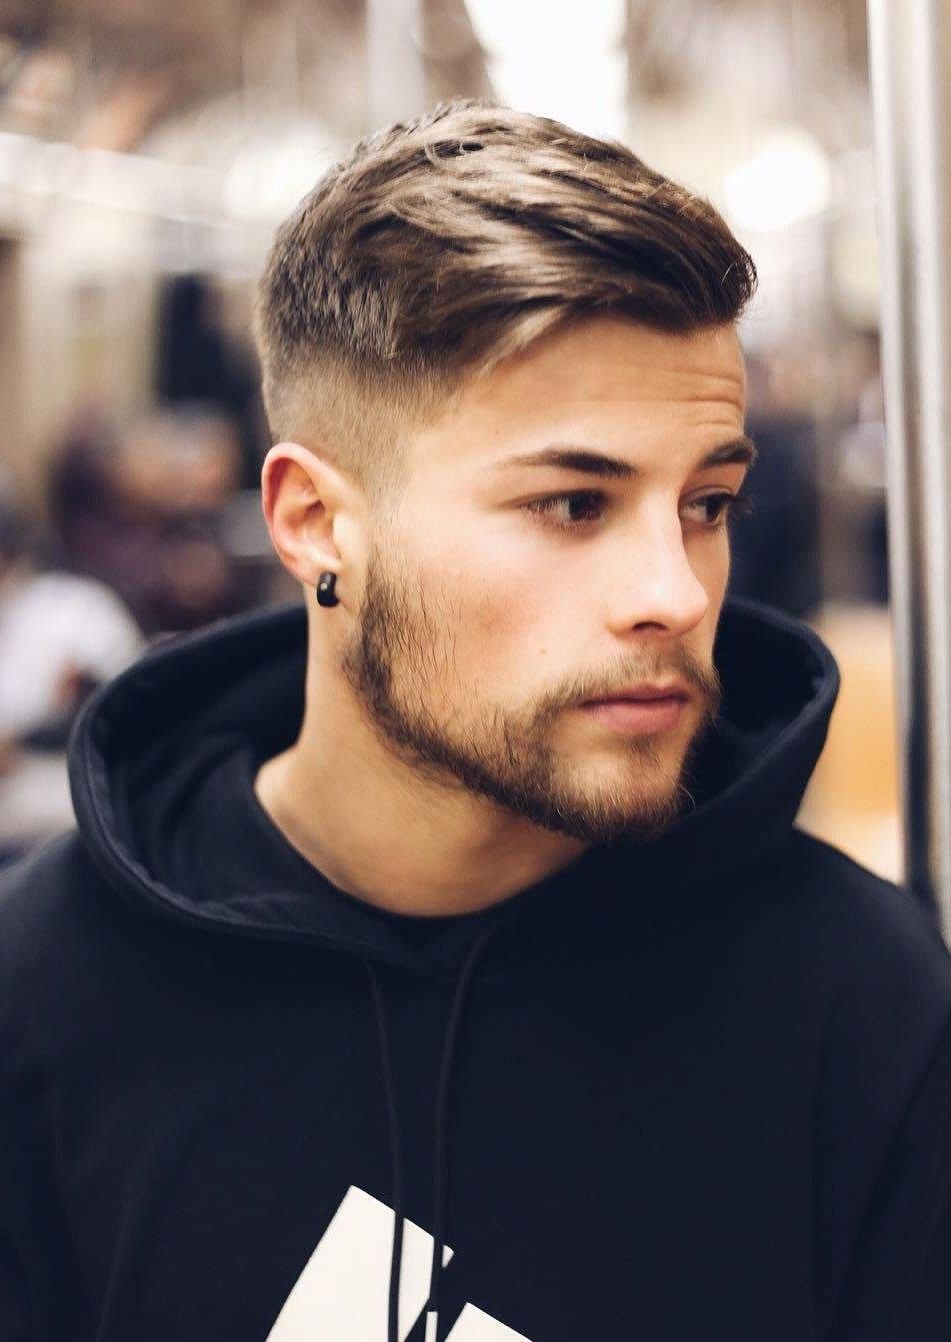 16 Sexiest Hairstyles For Men With Thin & Fine Hair | | Men's Throughout Short Hairstyles For Men With Fine Straight Hair (View 7 of 25)